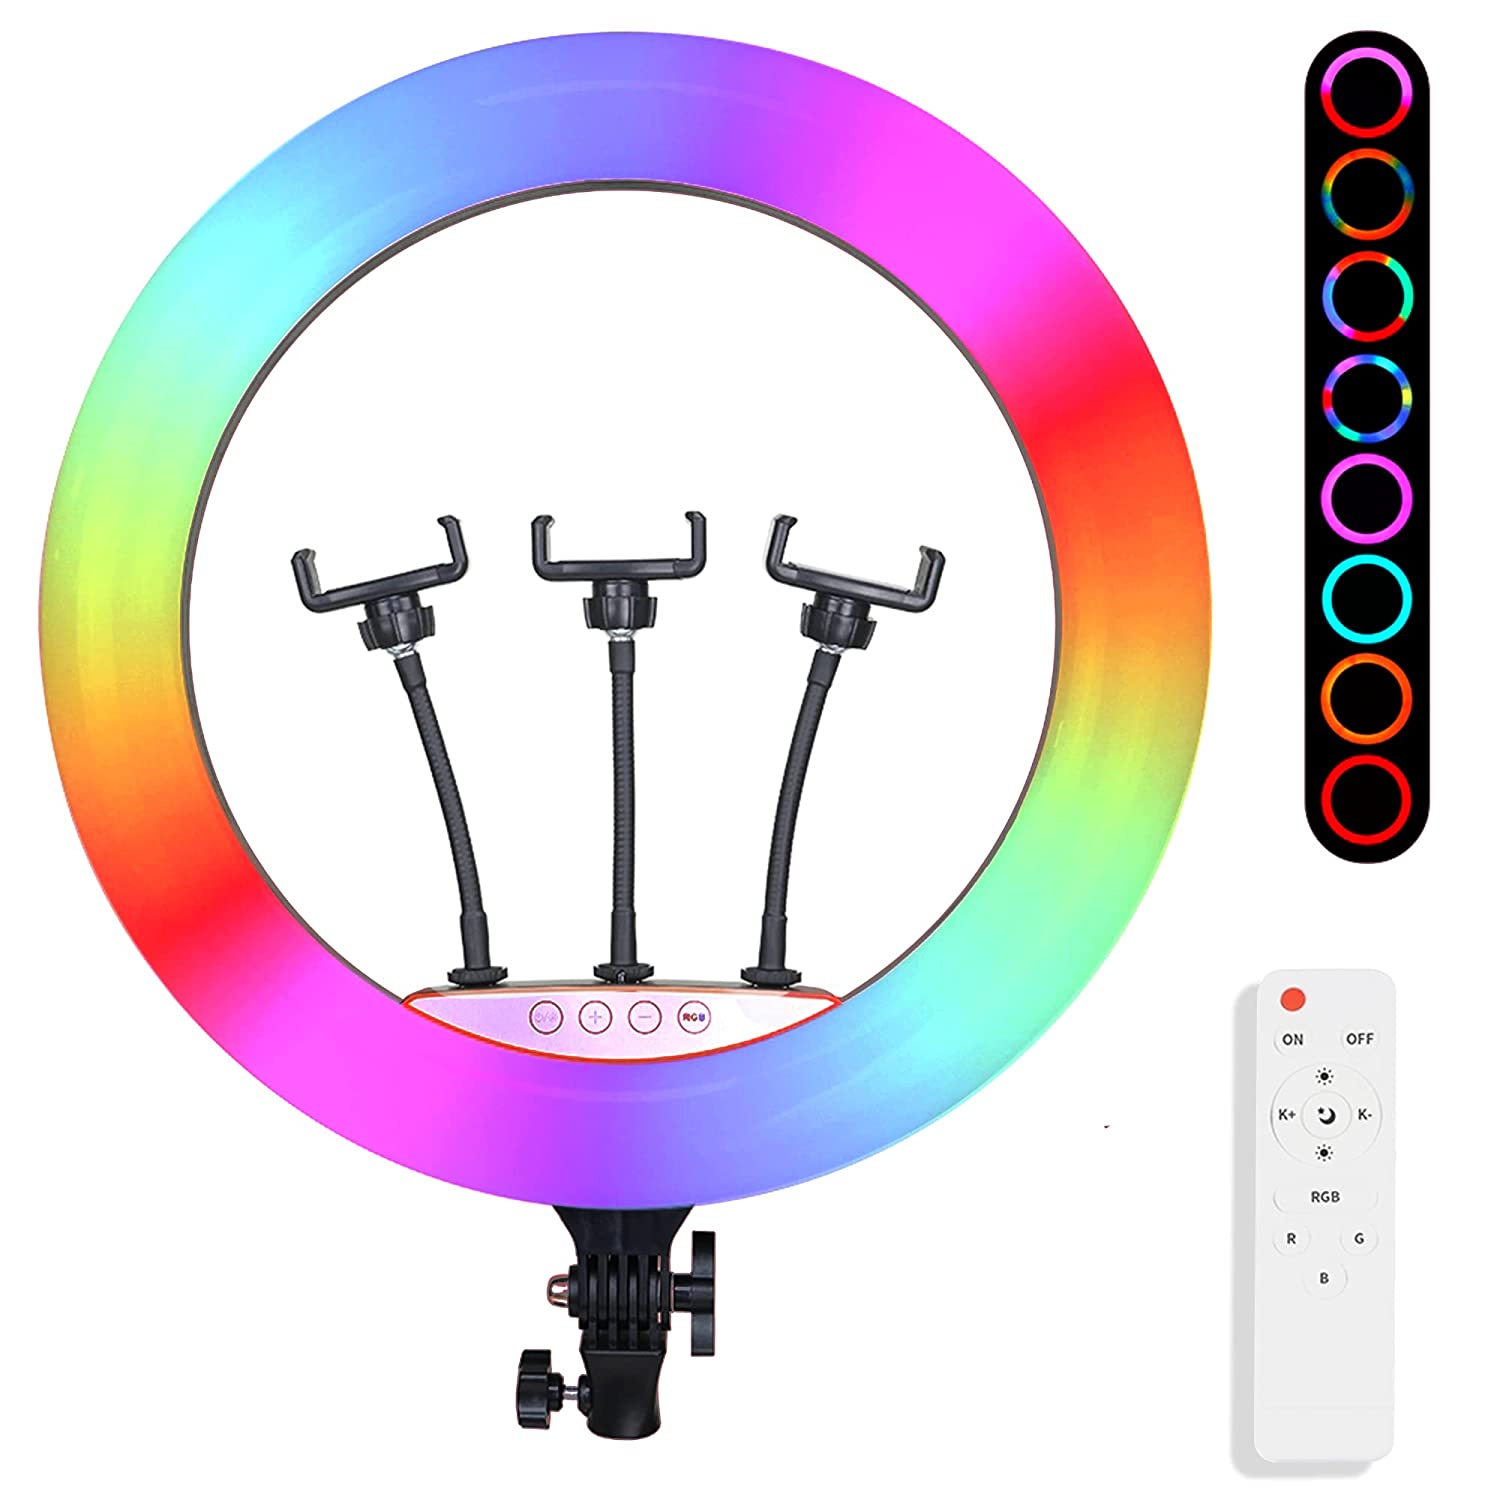 18 Inch RGB RingLights with Remote